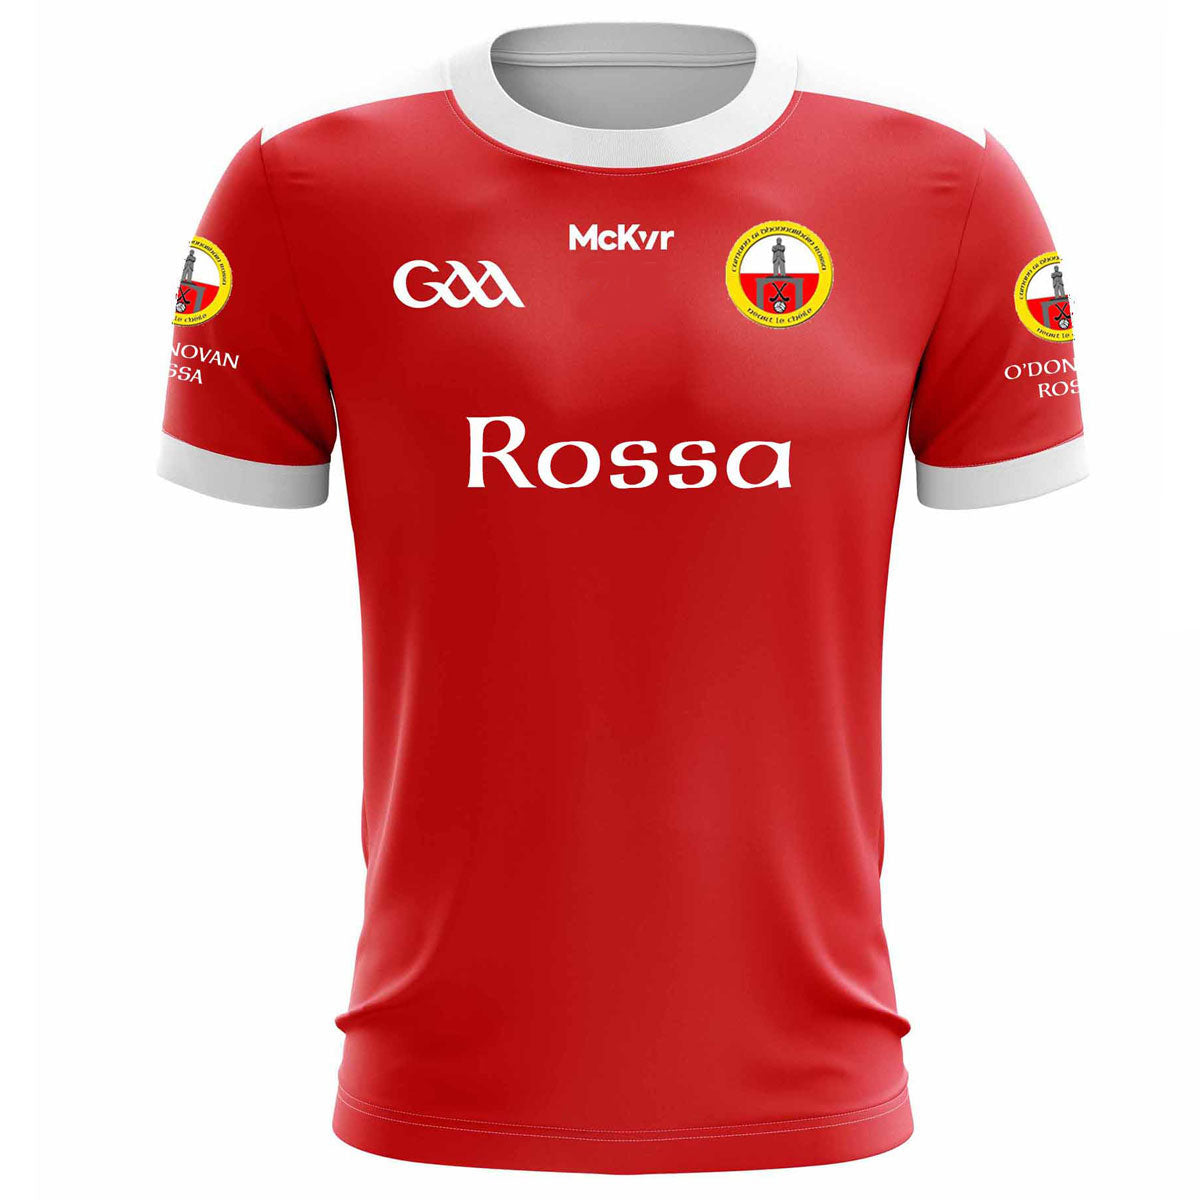 Mc Keever O'Donovan Rossa GAA Playing Jersey - Adult - Red/White